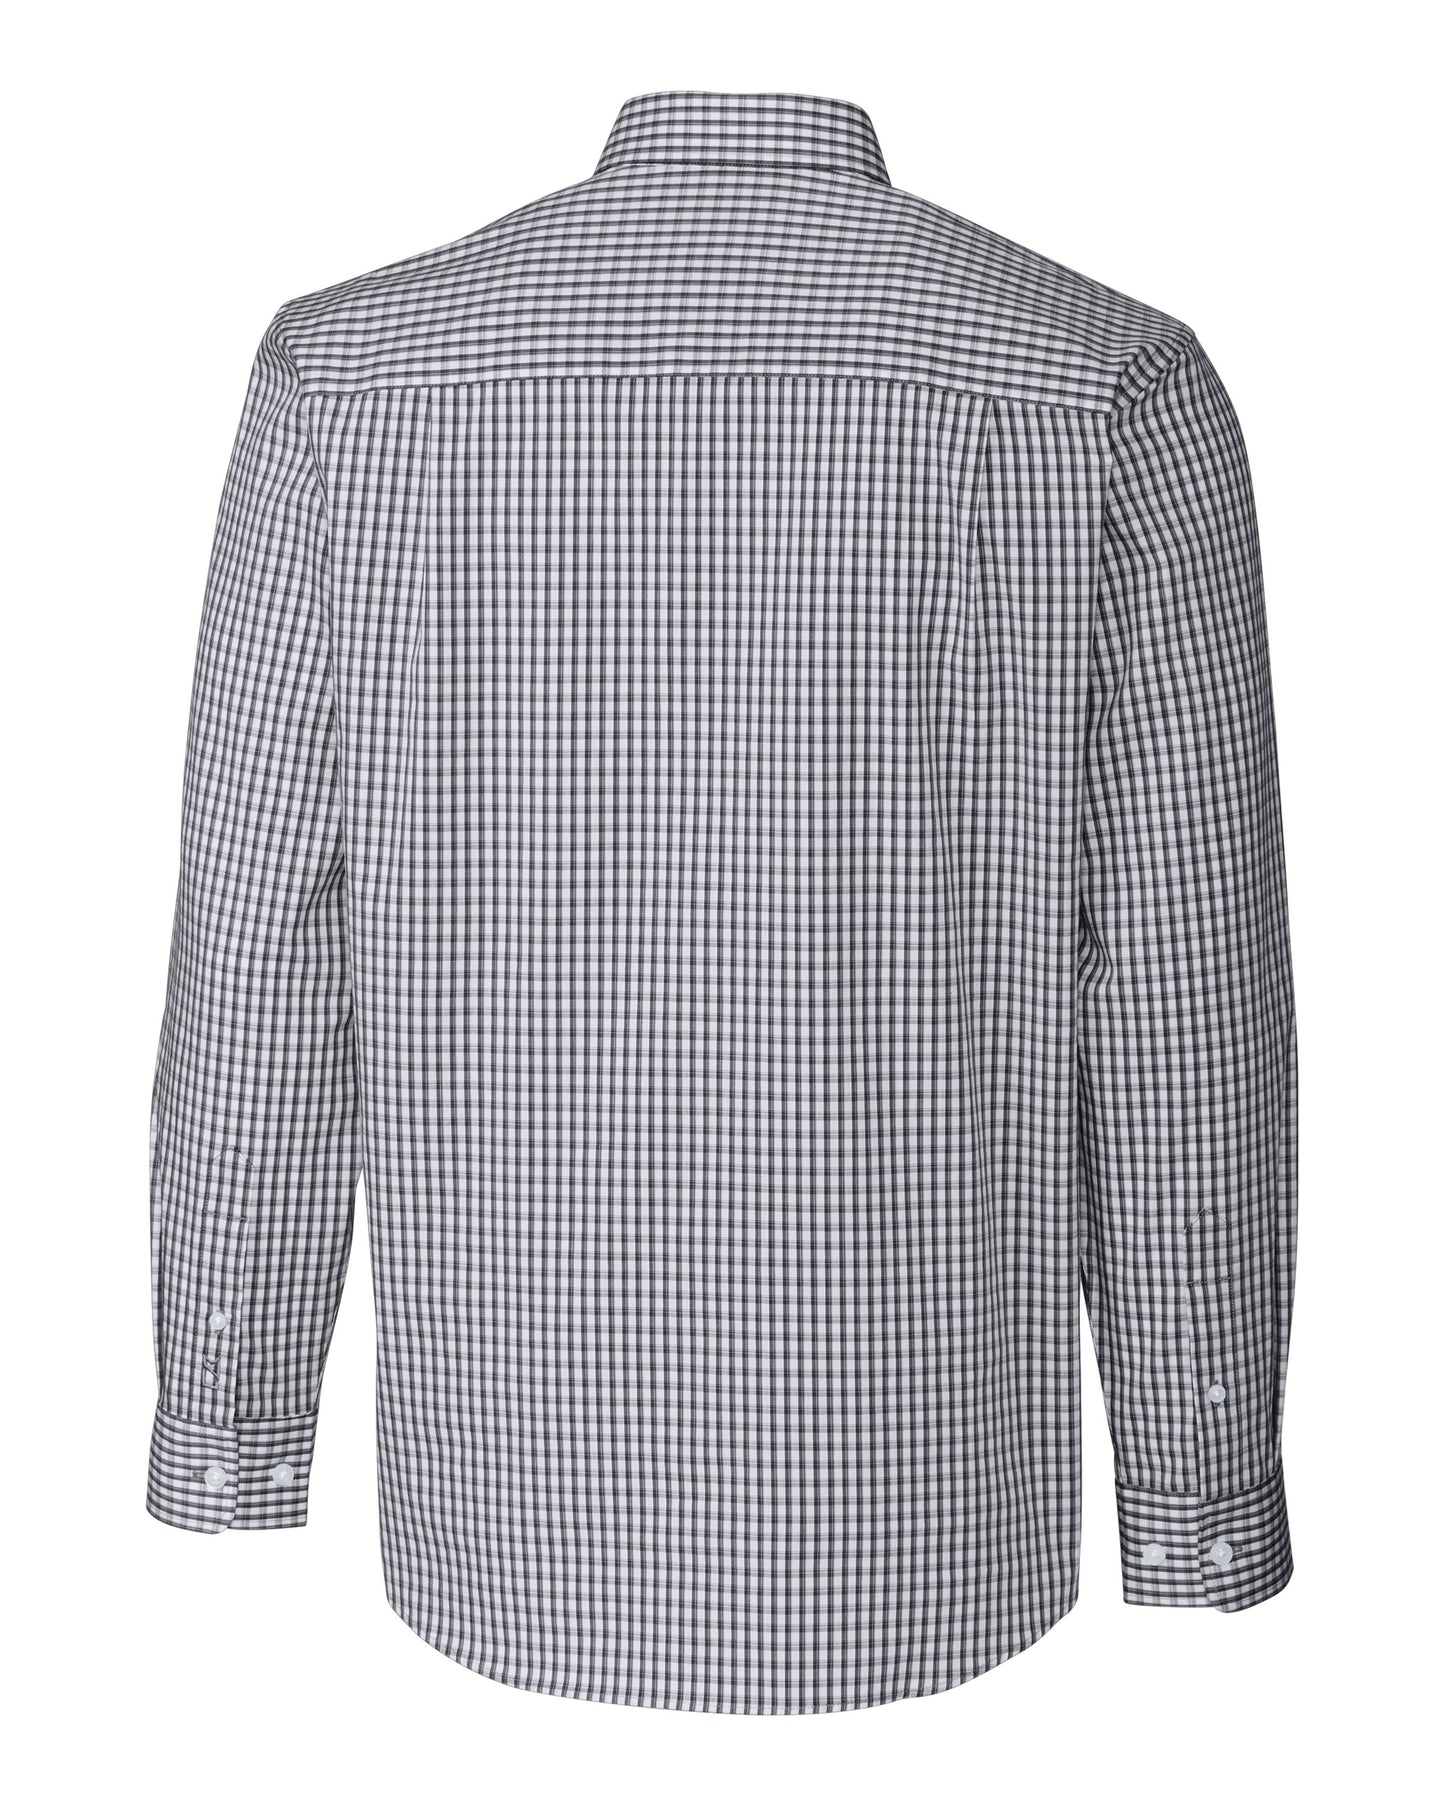 Cutter & Buck Easy Care Stretch Gingham Dress Shirt Charcoal